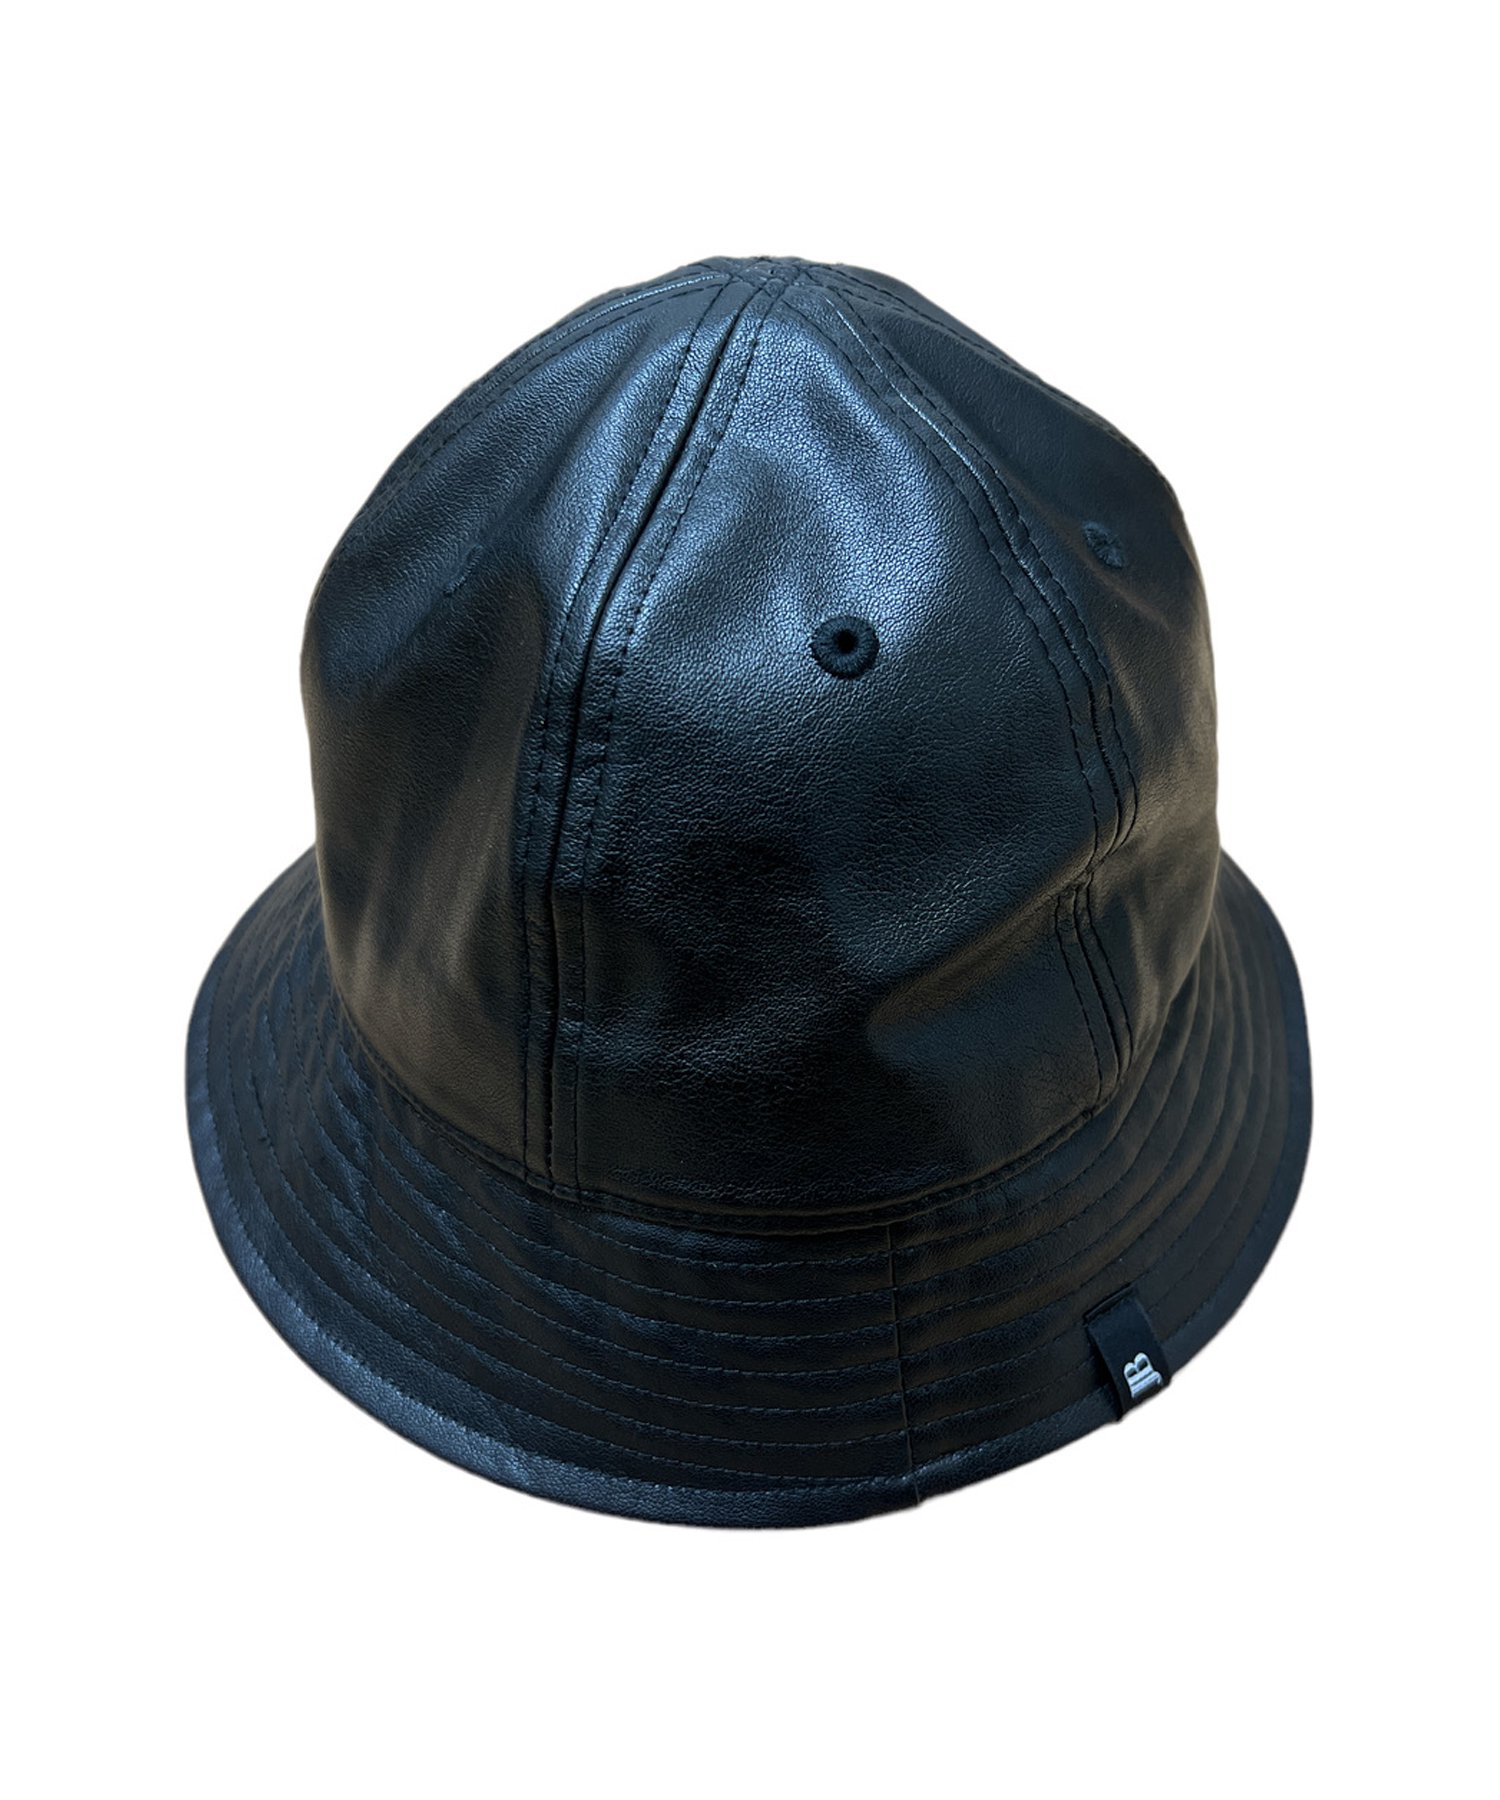 JOHNNY BUSINESS （ジョニービジネス） Synthetic Leather Crew HAT